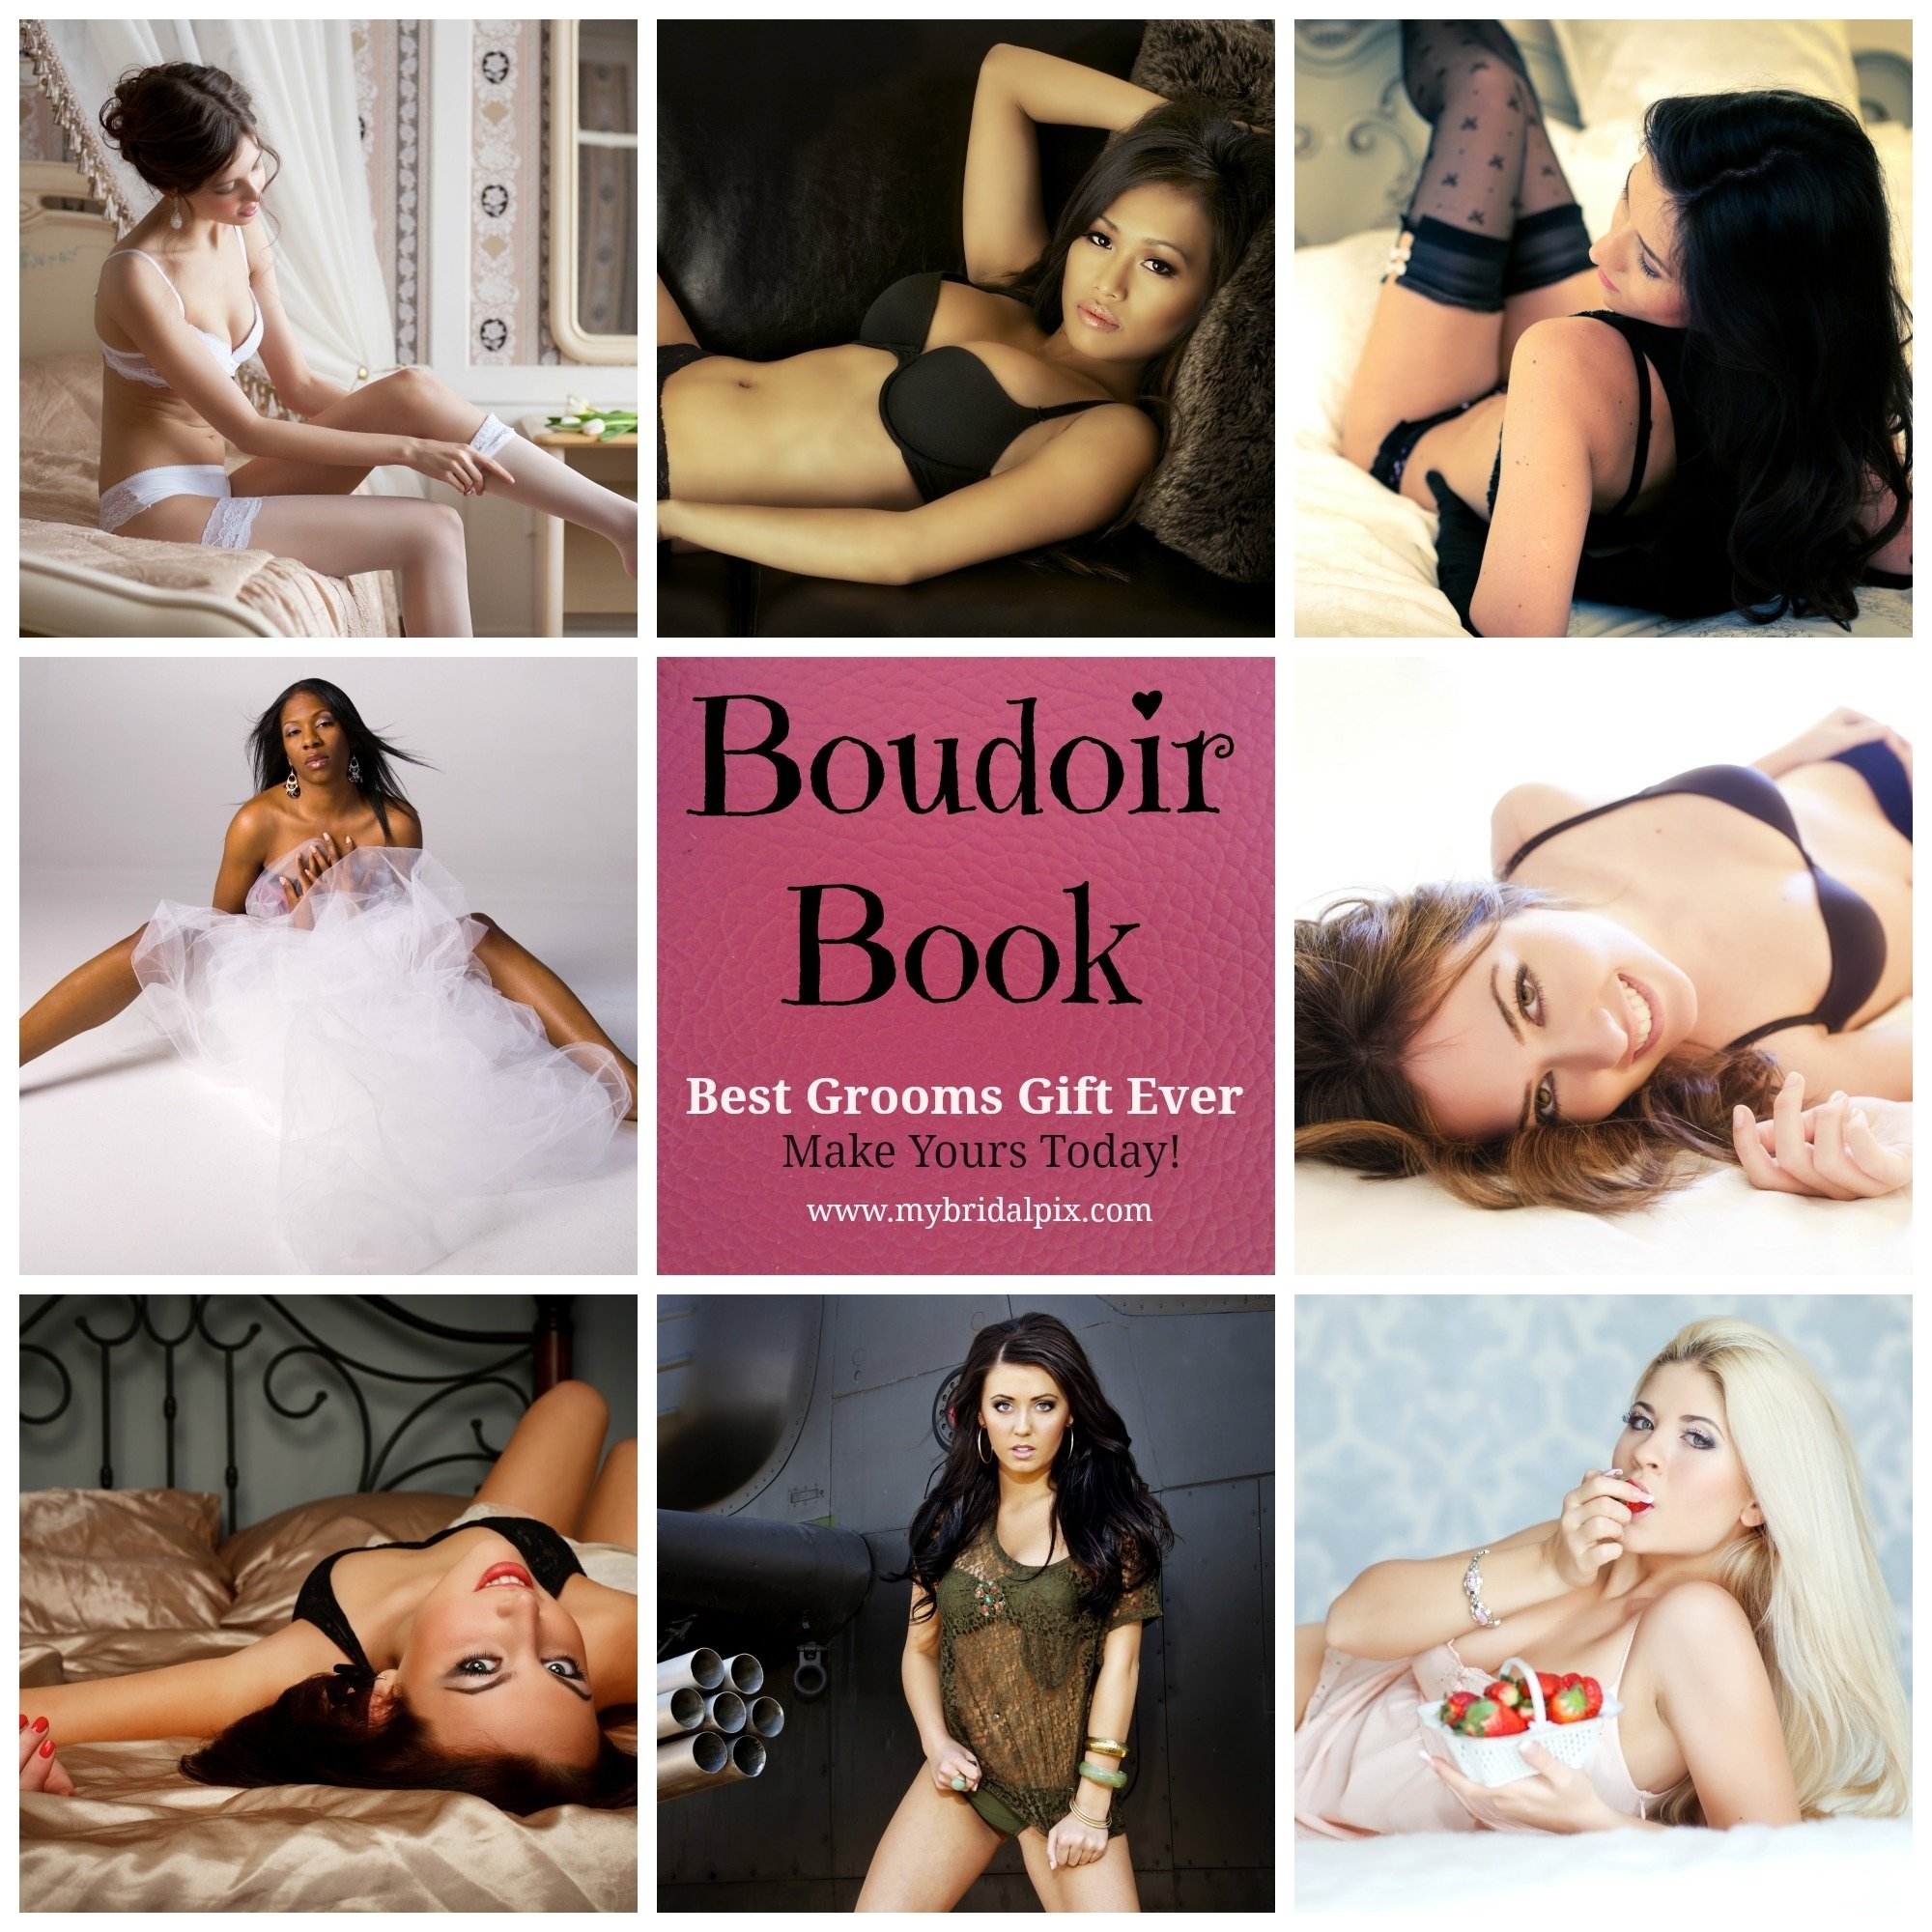 10 Perfect Boudoir Photo Ideas For Husband boudoir book the best grooms gift ever e280a2 my bridal pix 2022